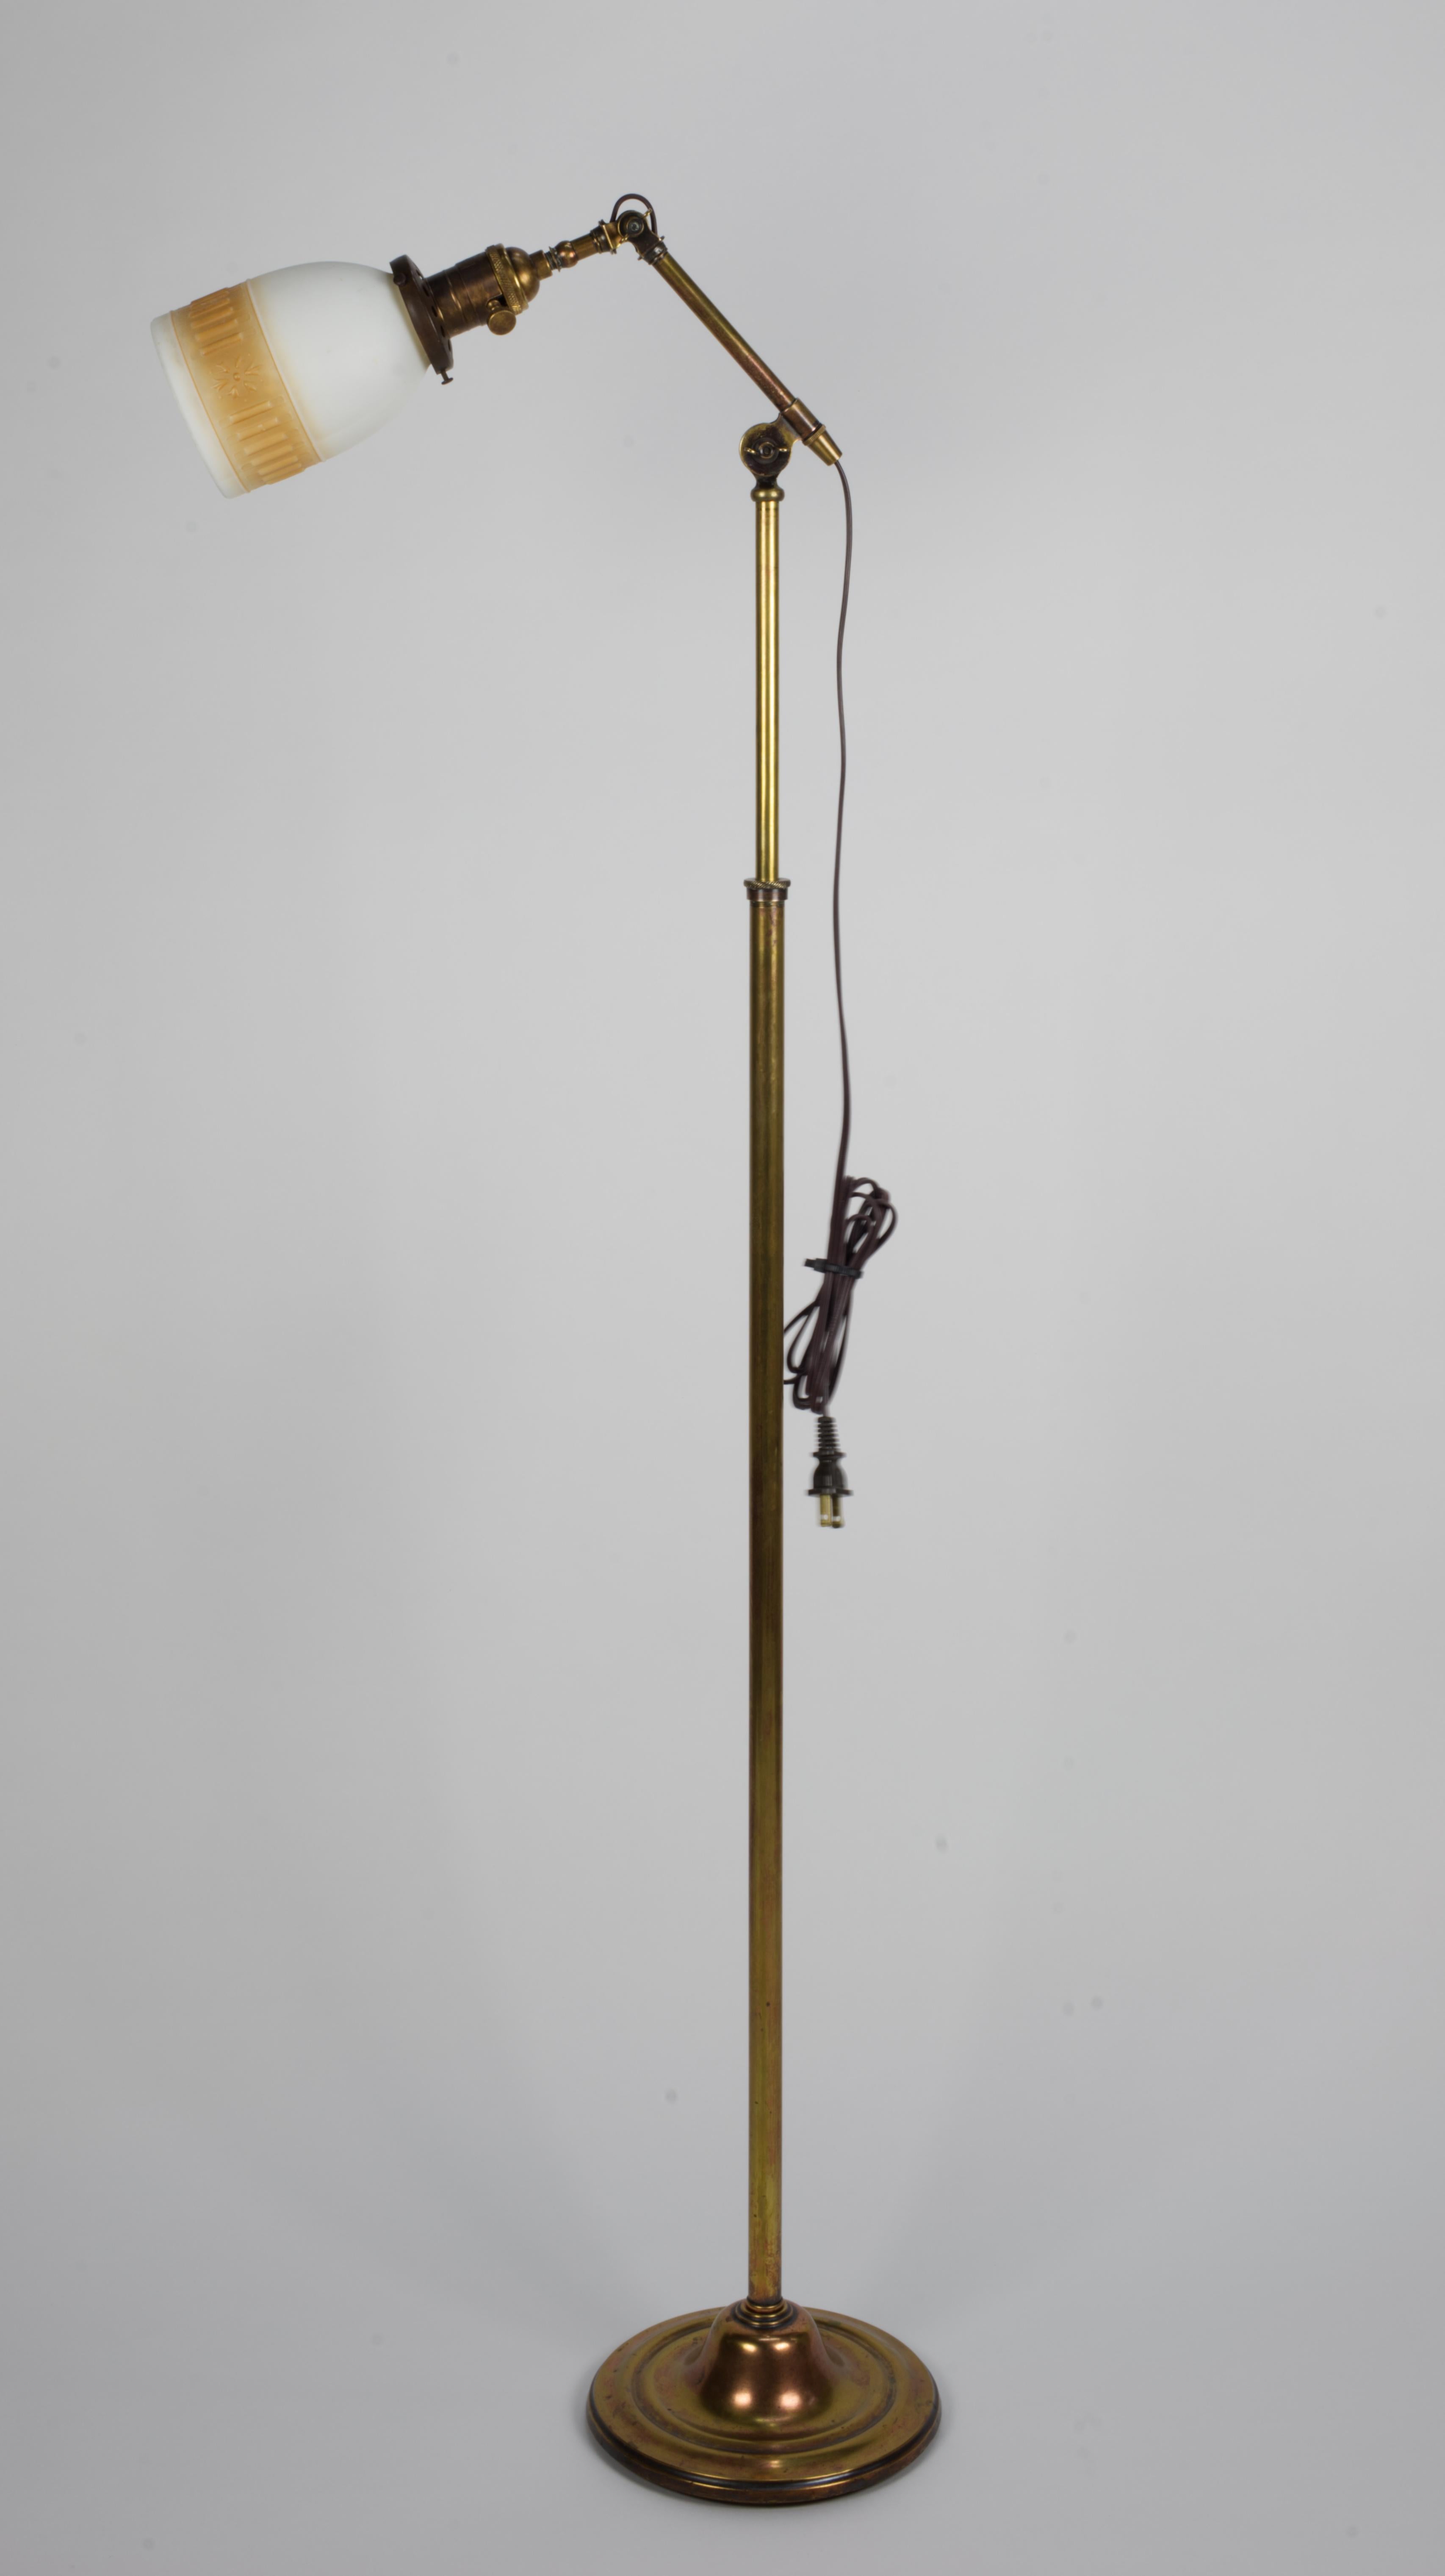 Adjustable brass Torsher from 1940s. 
Height varies from 53.5